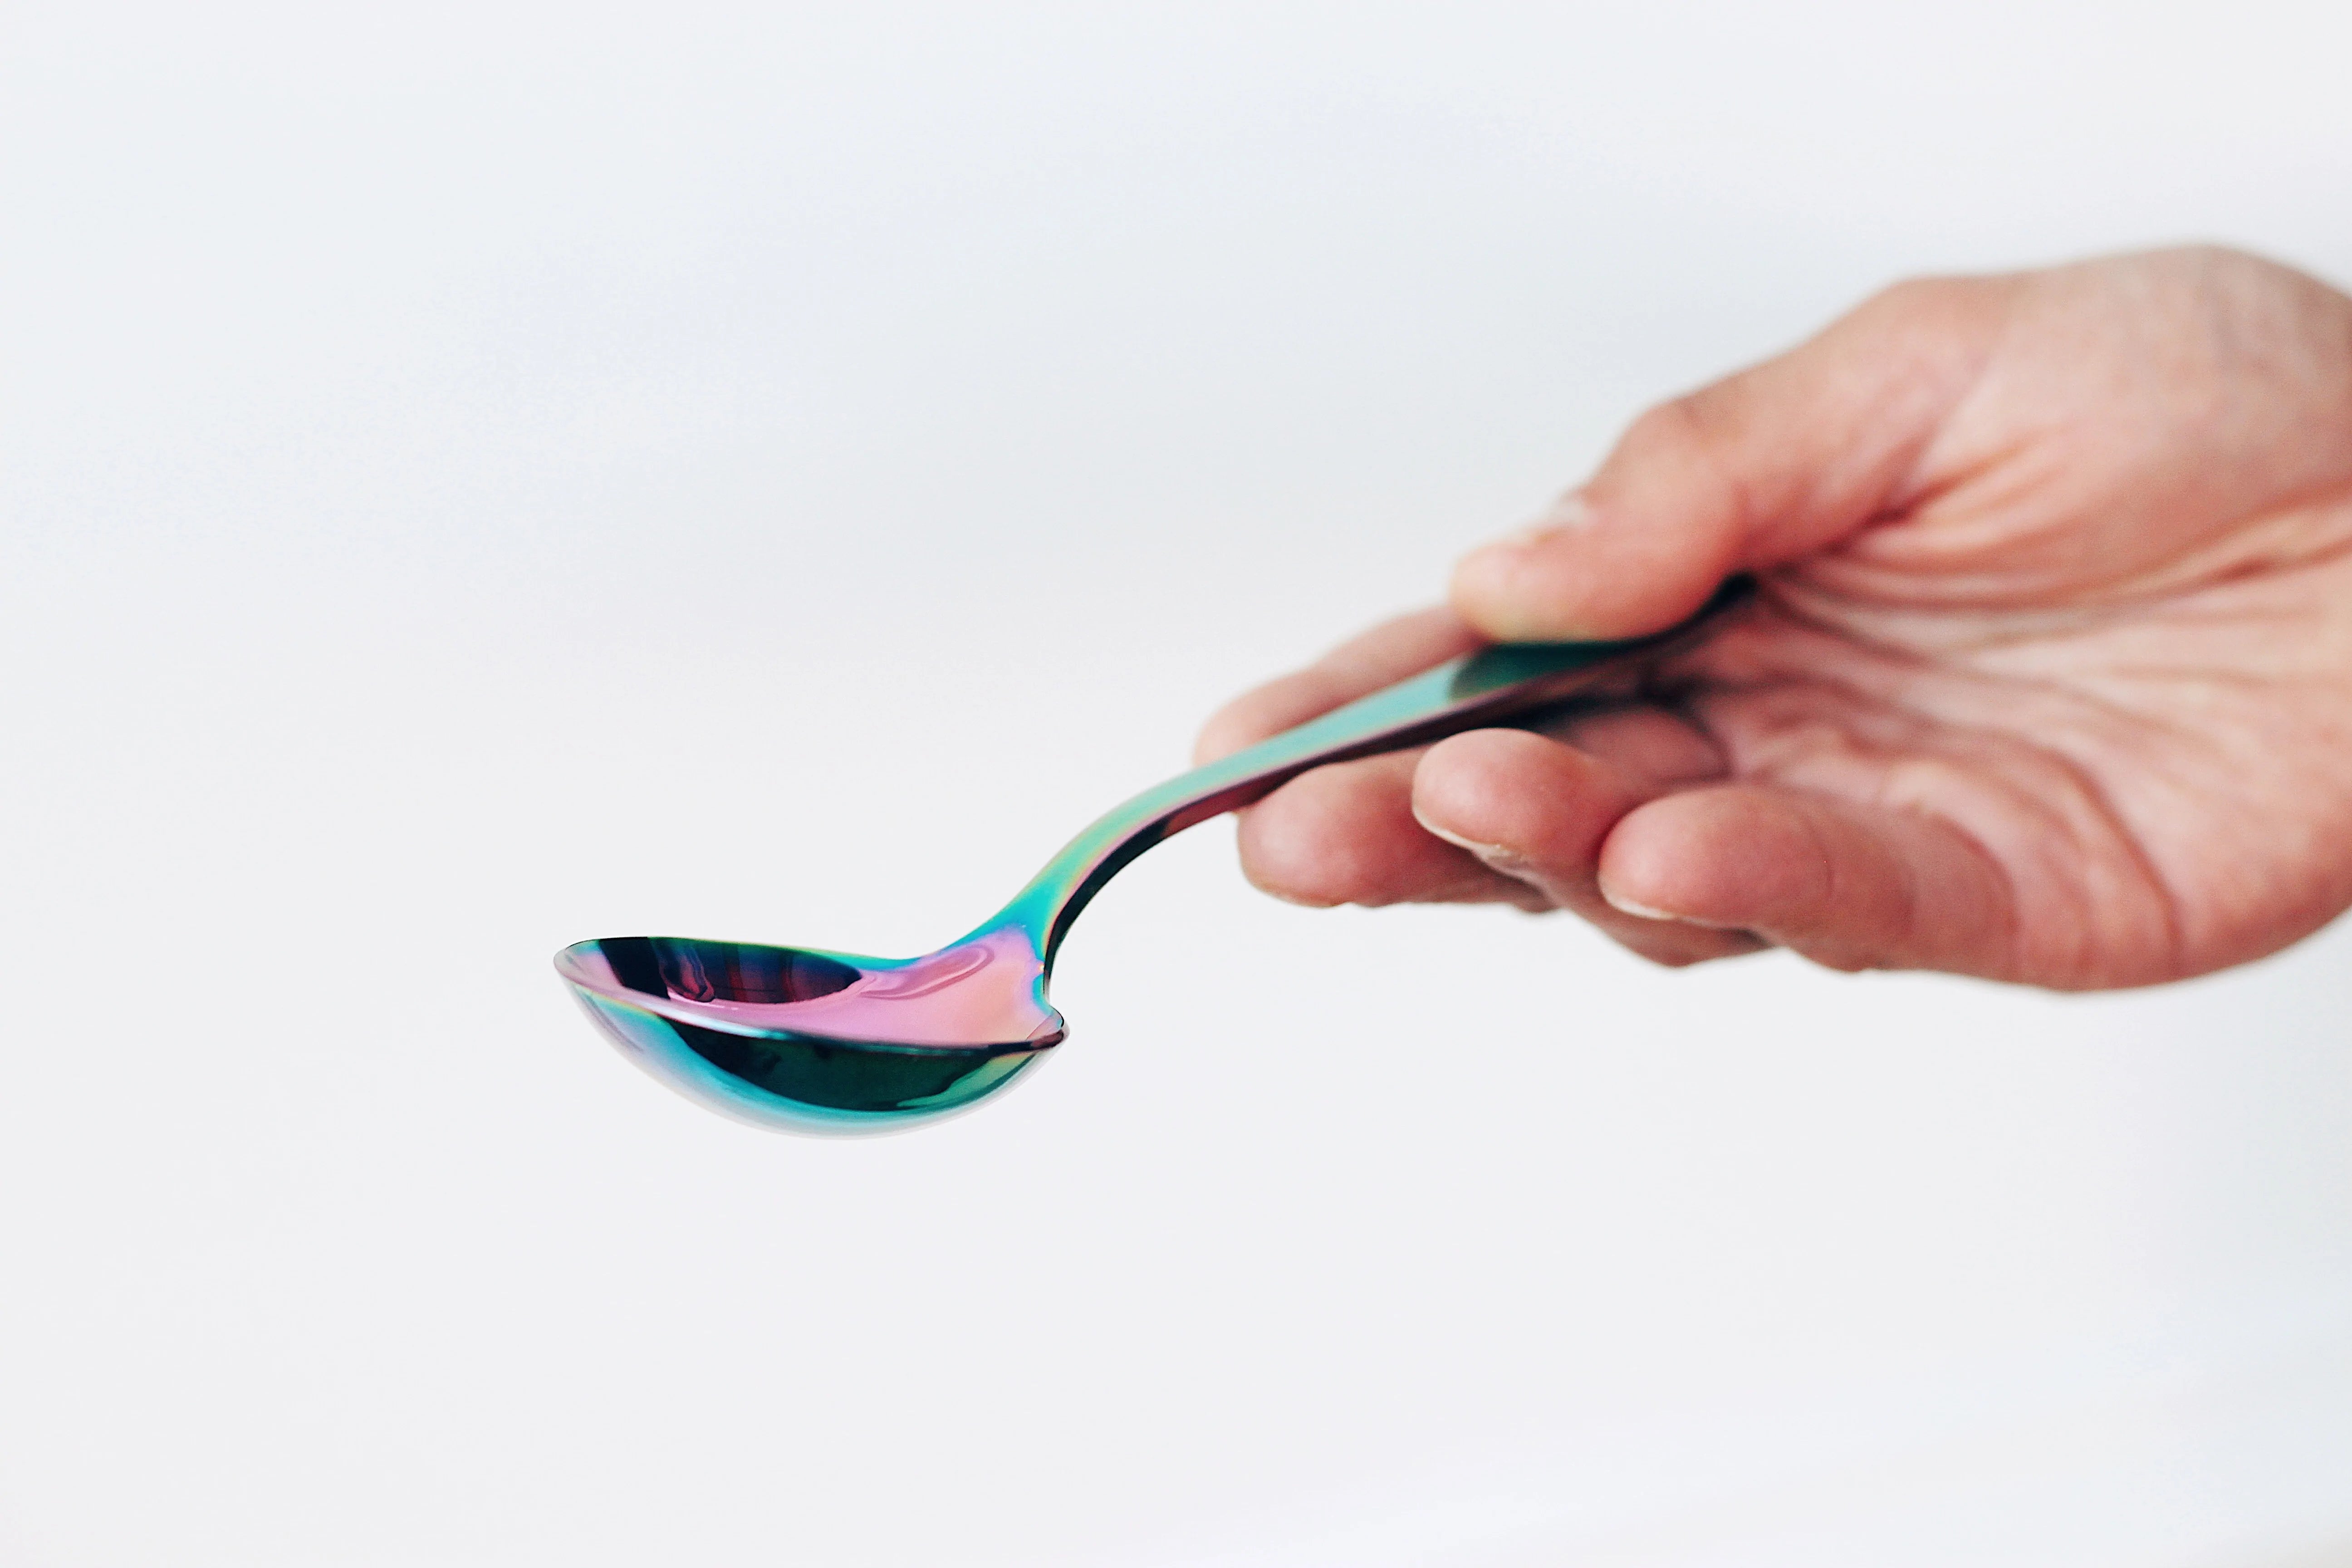 Umeshiso Little Dipper Rose Cupping Spoon